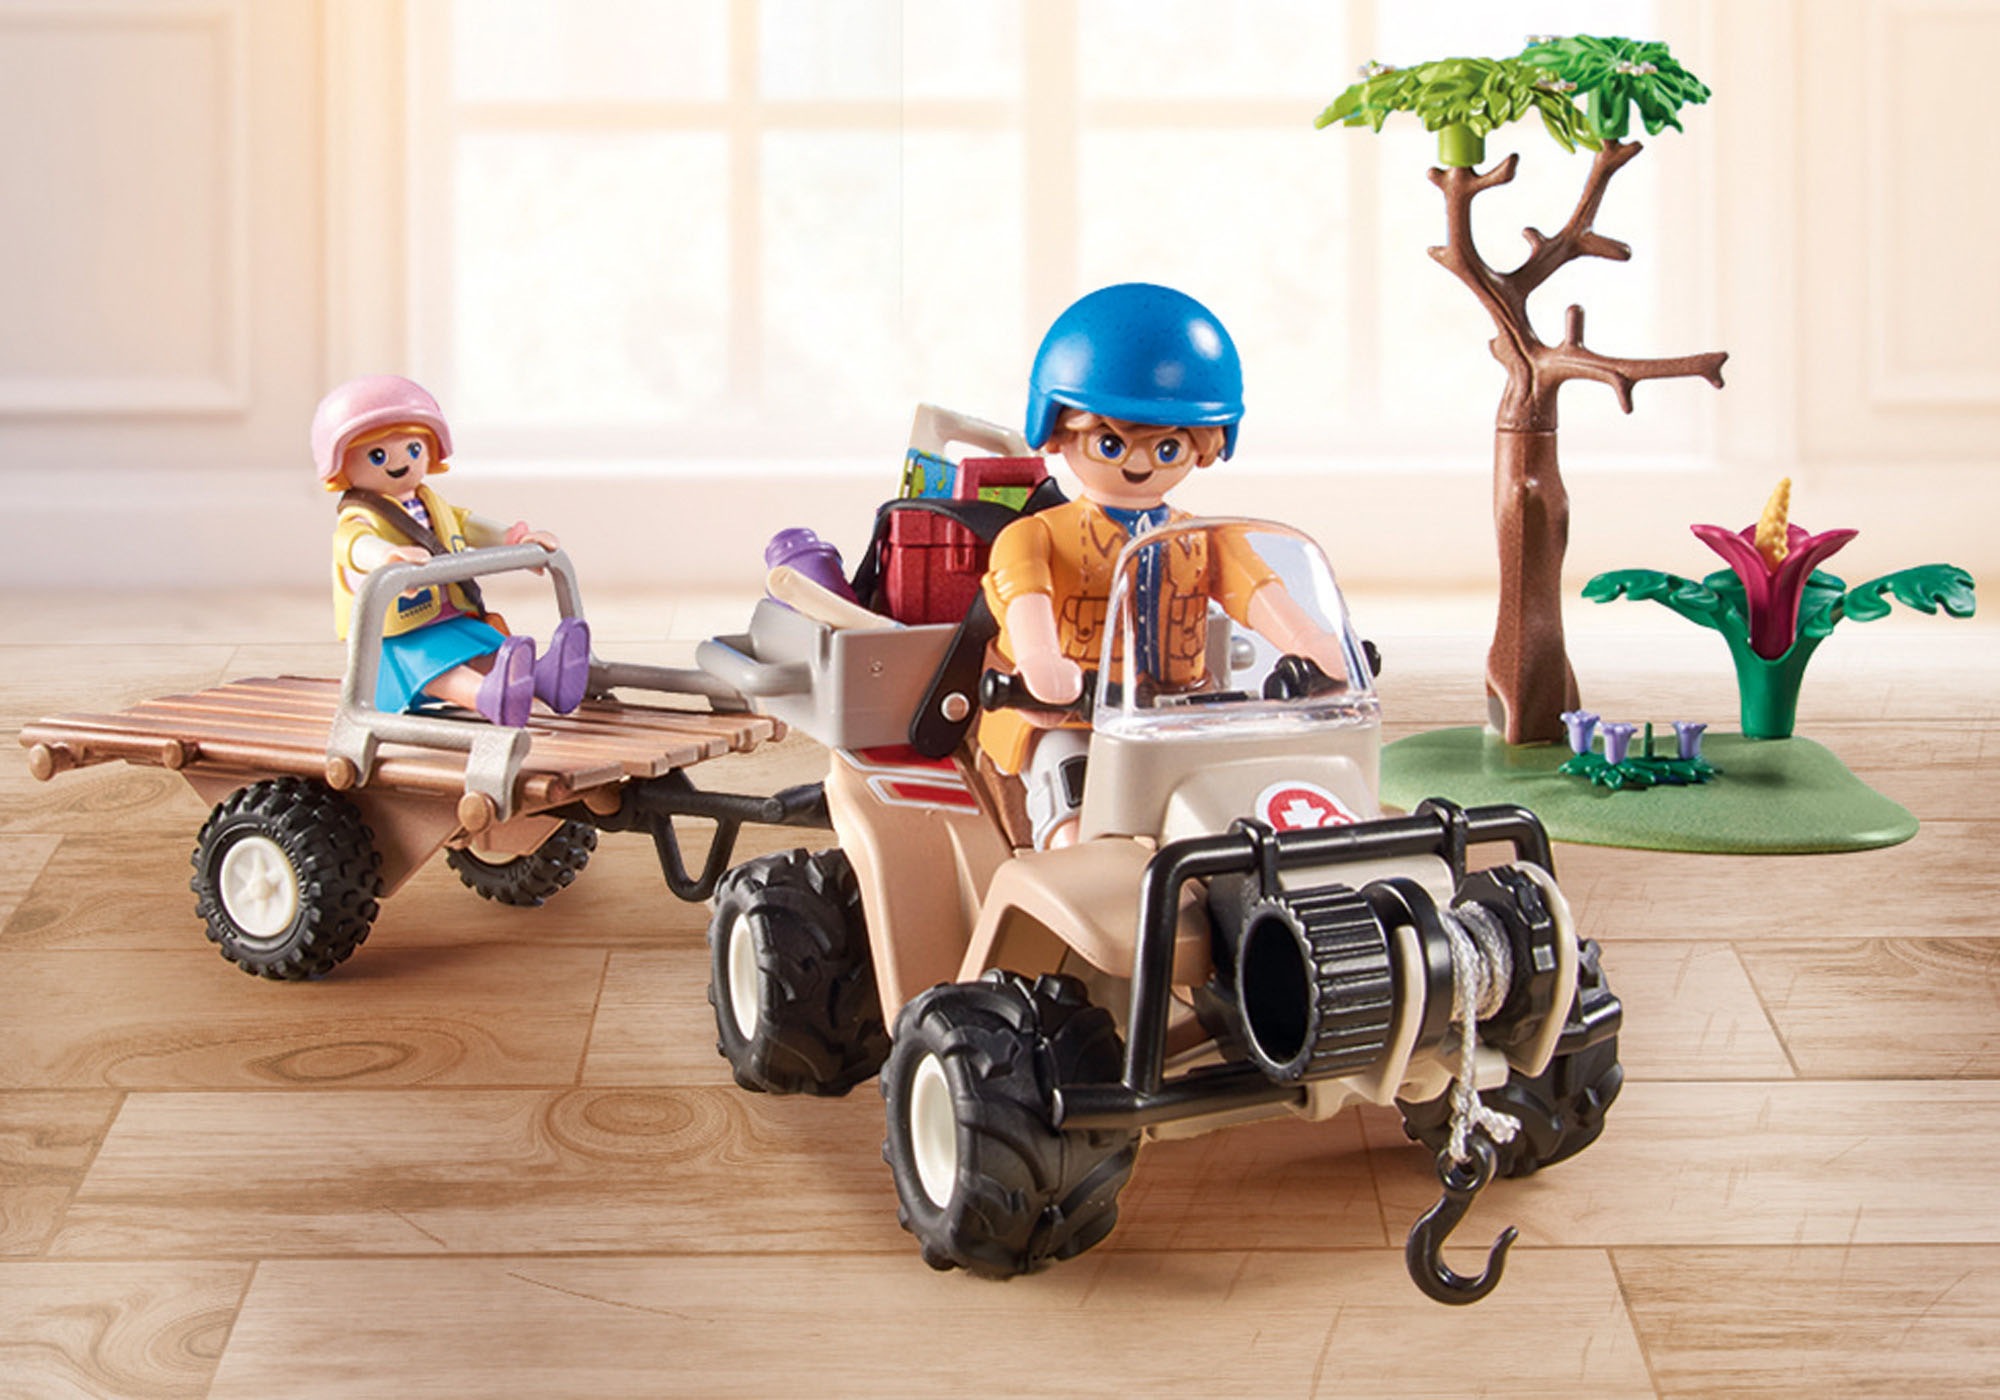 Playmobil® Konstruktions-Spielset »Wiltopia - Tierrettungs-Quad (71011), Wiltopia«, (58 St.), teilweise aus recyceltem Material; Made in Europe